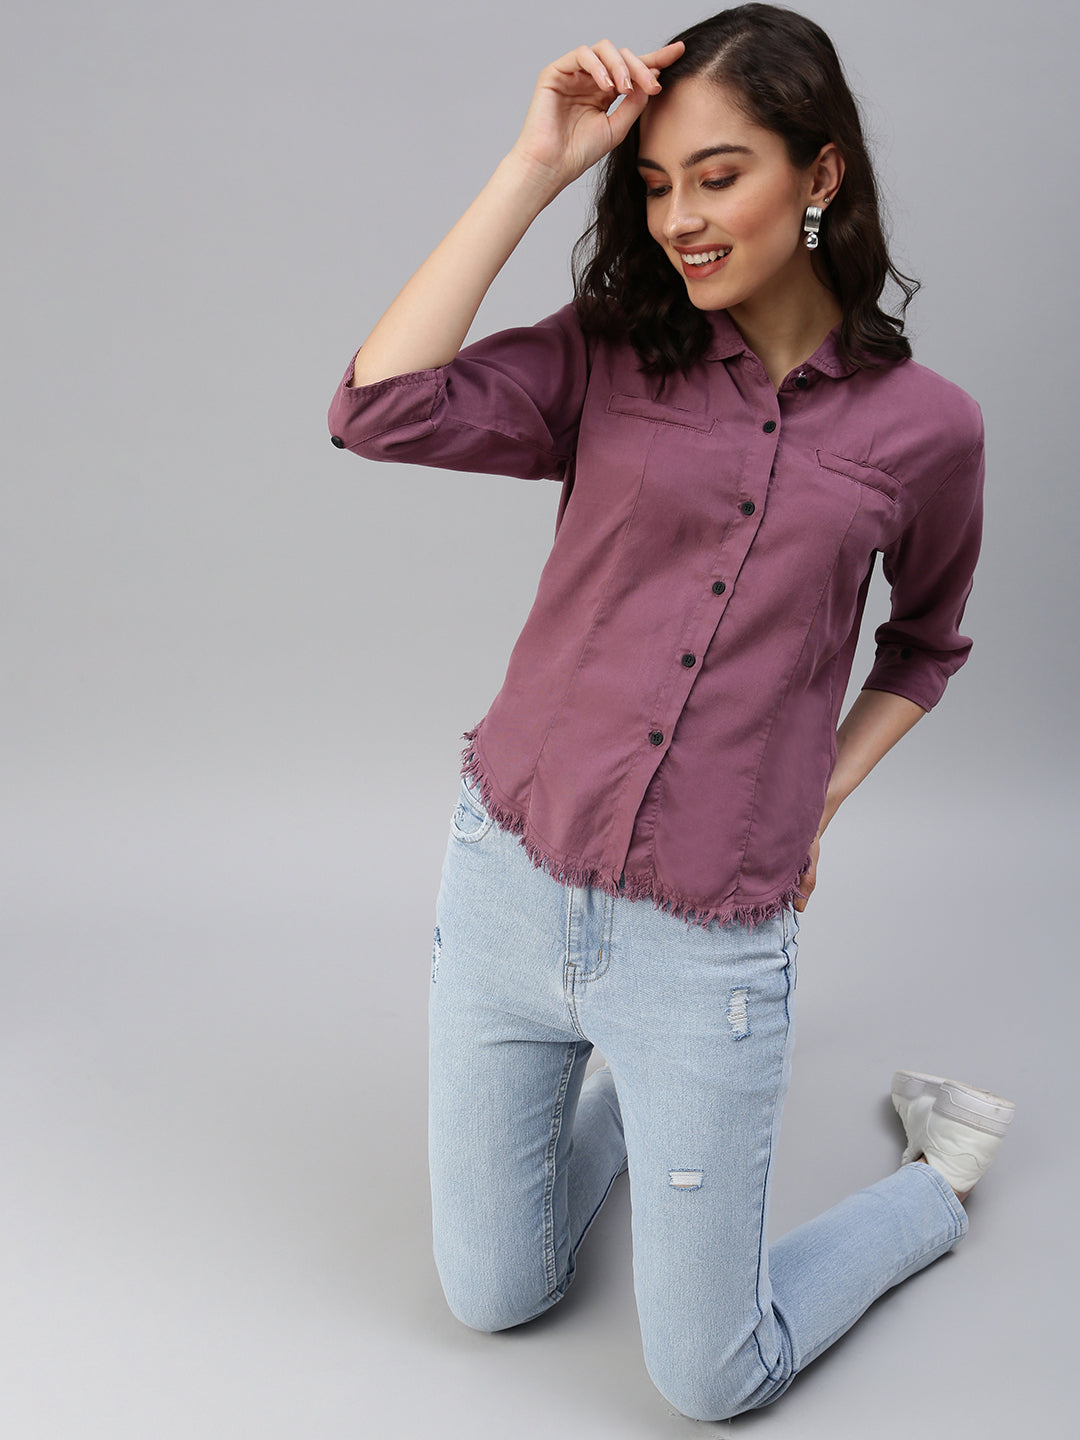 Women's Grey Solid Casual Shirts